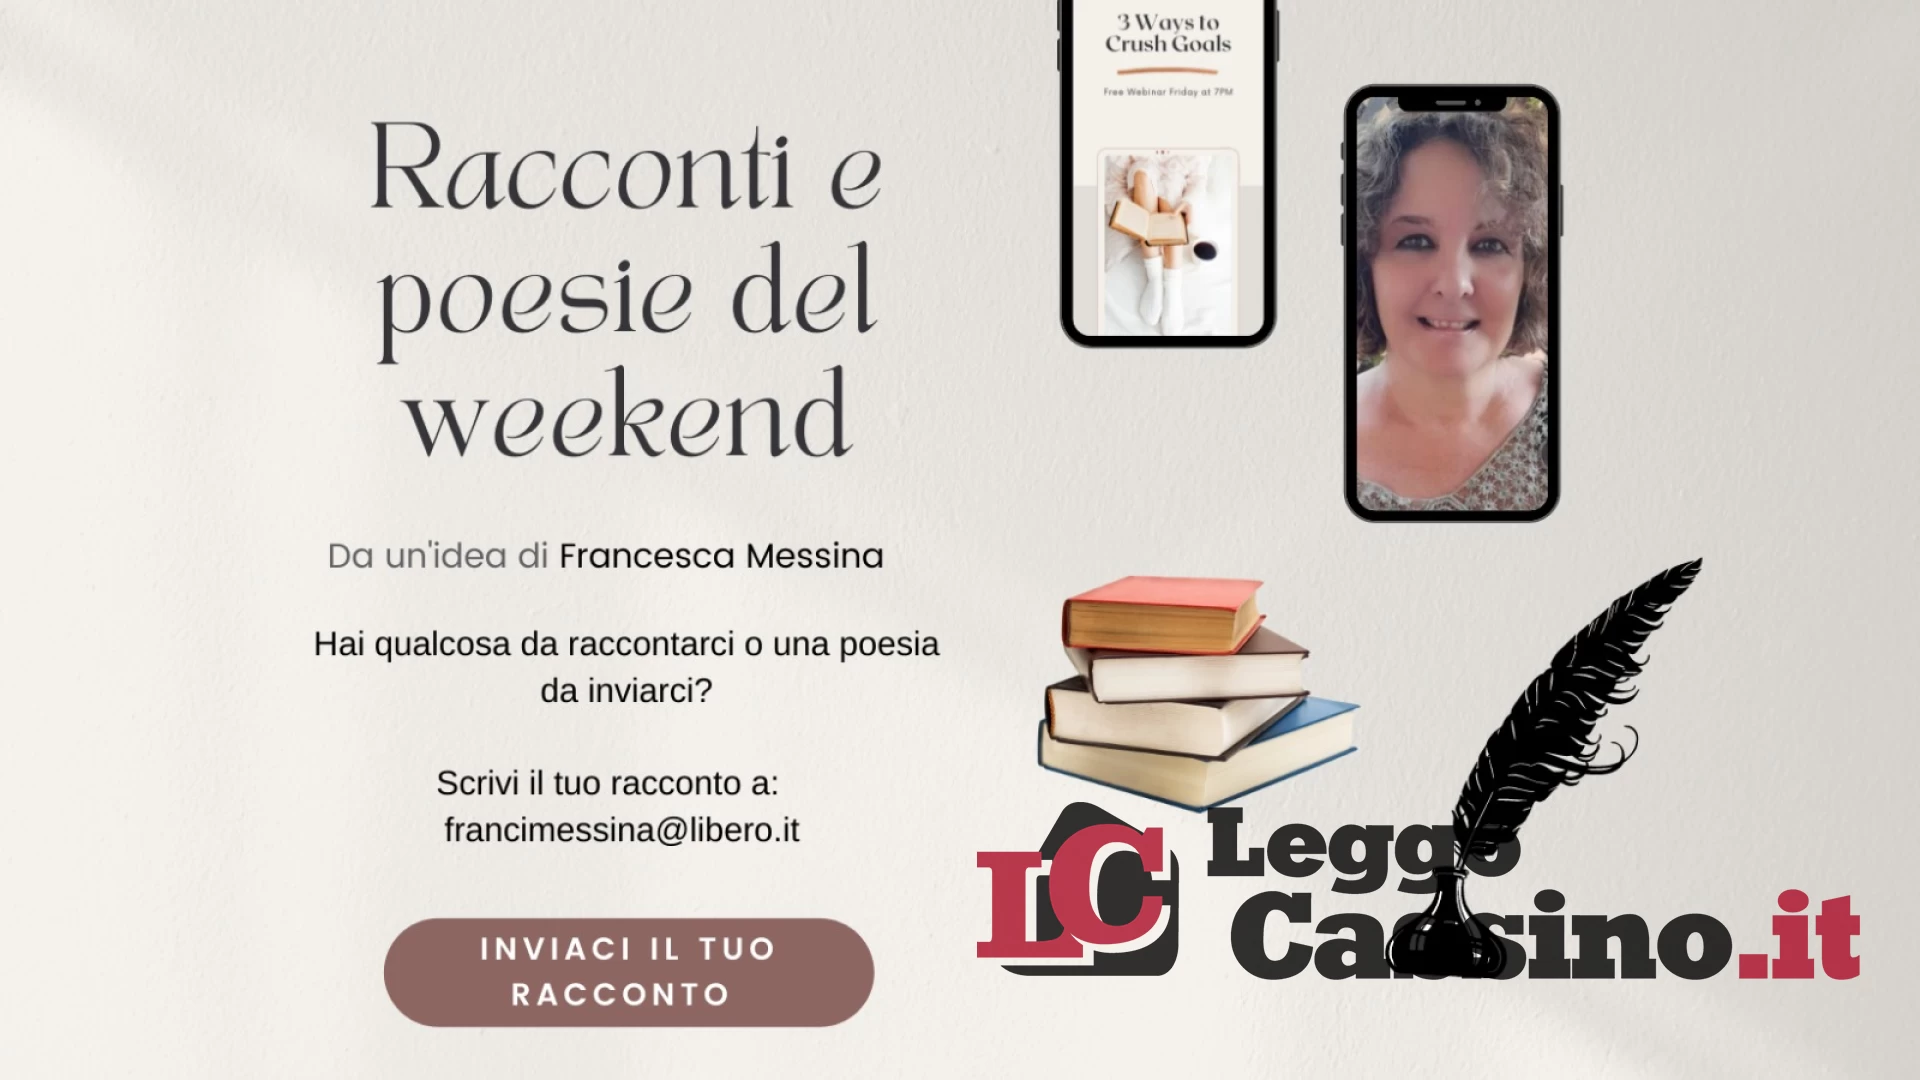 Racconti e Poesie del weekend "All'amica speciale"